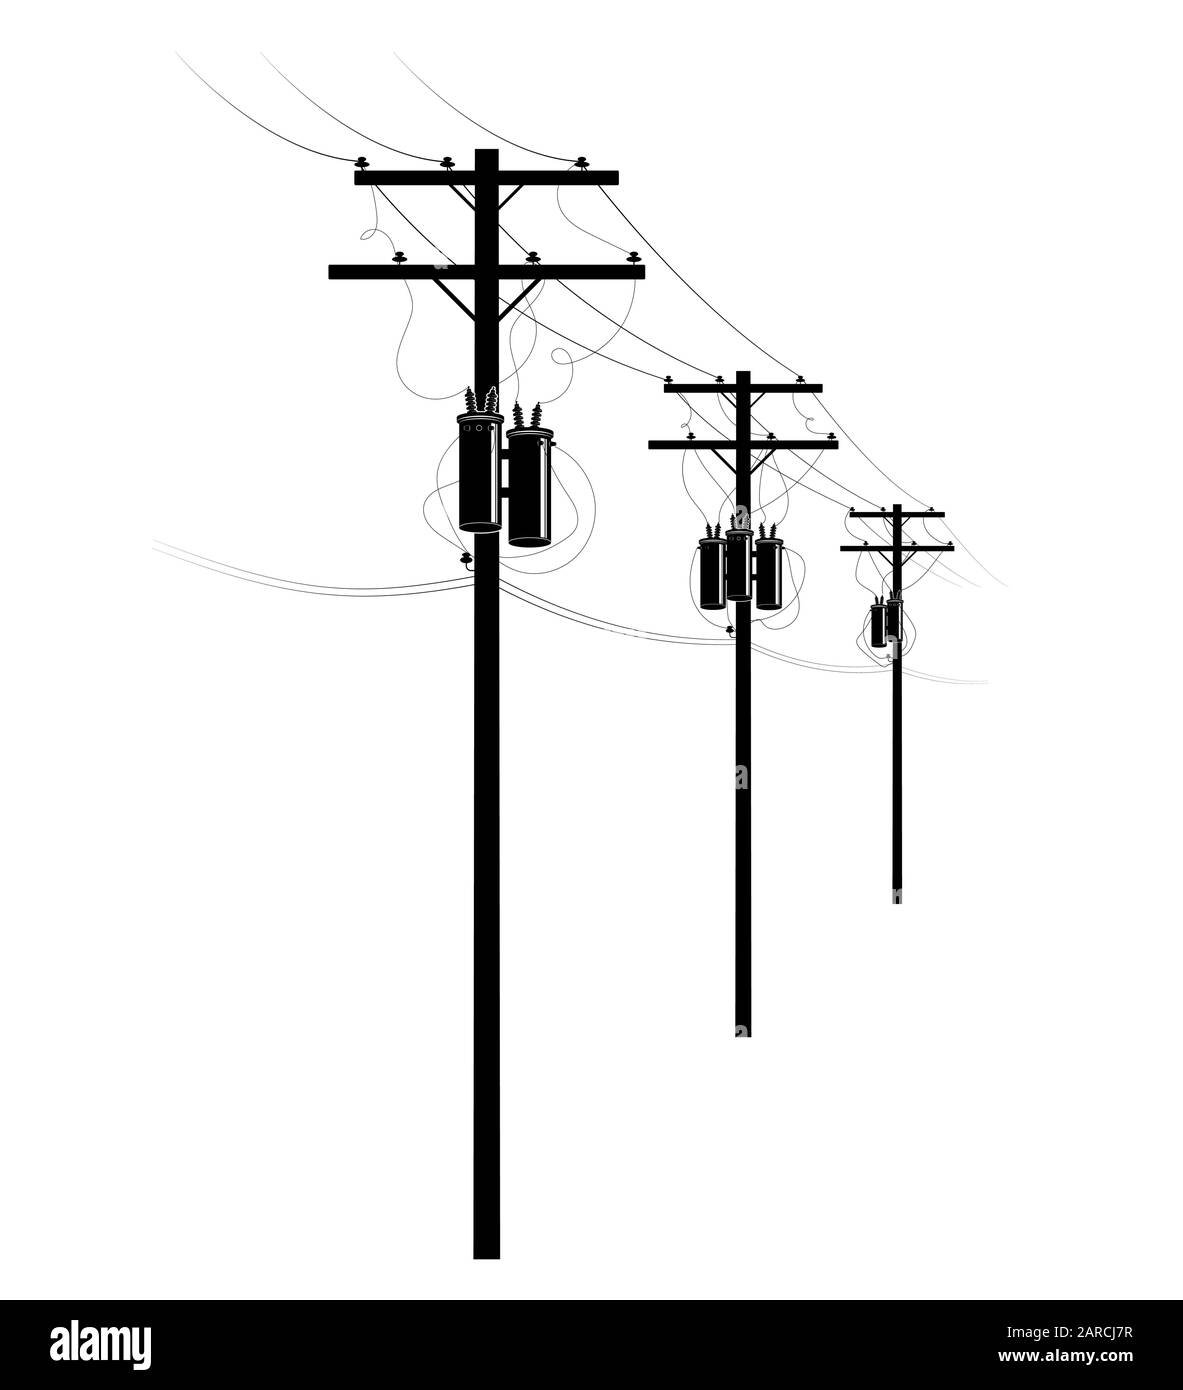 Power supply of residential buildings. A row of pillars on the street. Transformers and wires on poles. U.S. street. Stock Vector